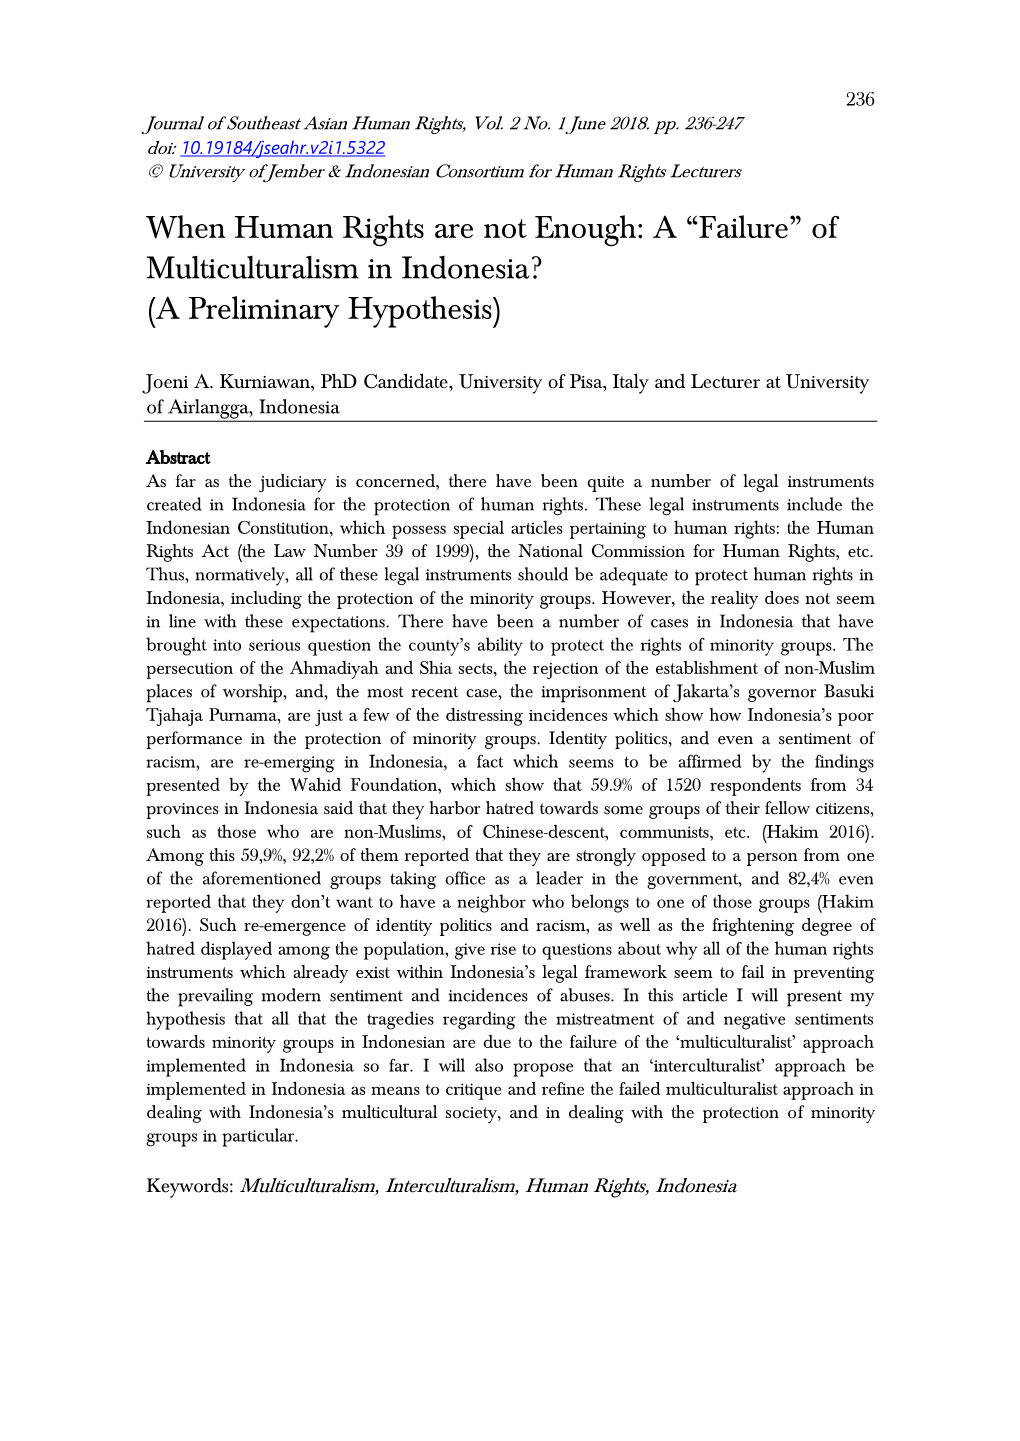 Of Multiculturalism in Indonesia? (A Preliminary Hypothesis)